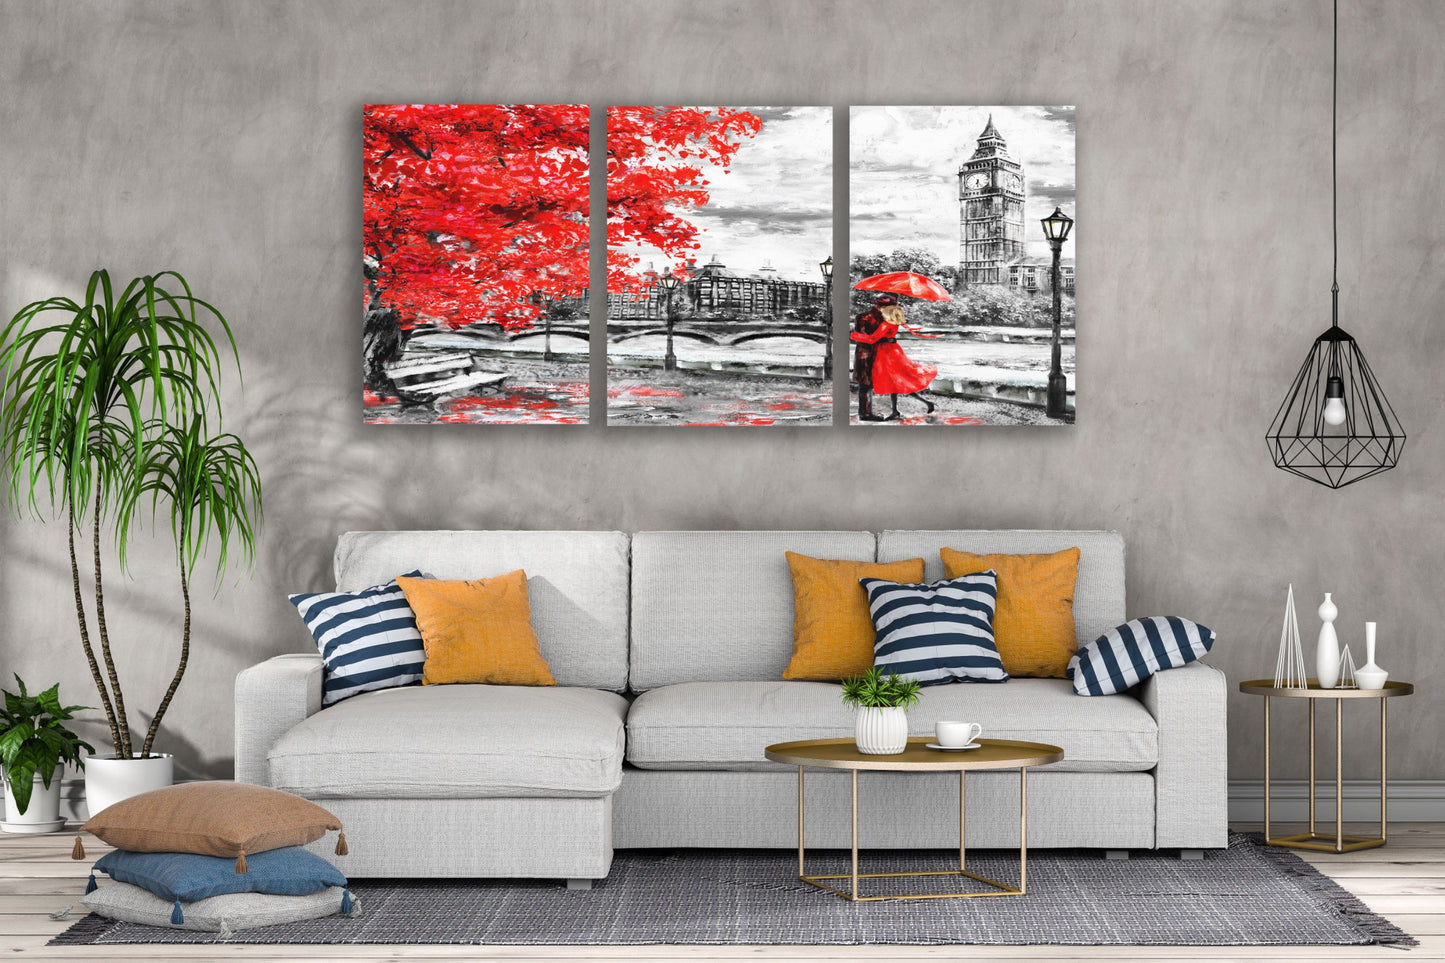 3 Set of Couple in London Red , B&W Watercolor Painting High Quality Print 100% Australian Made Wall Canvas Ready to Hang